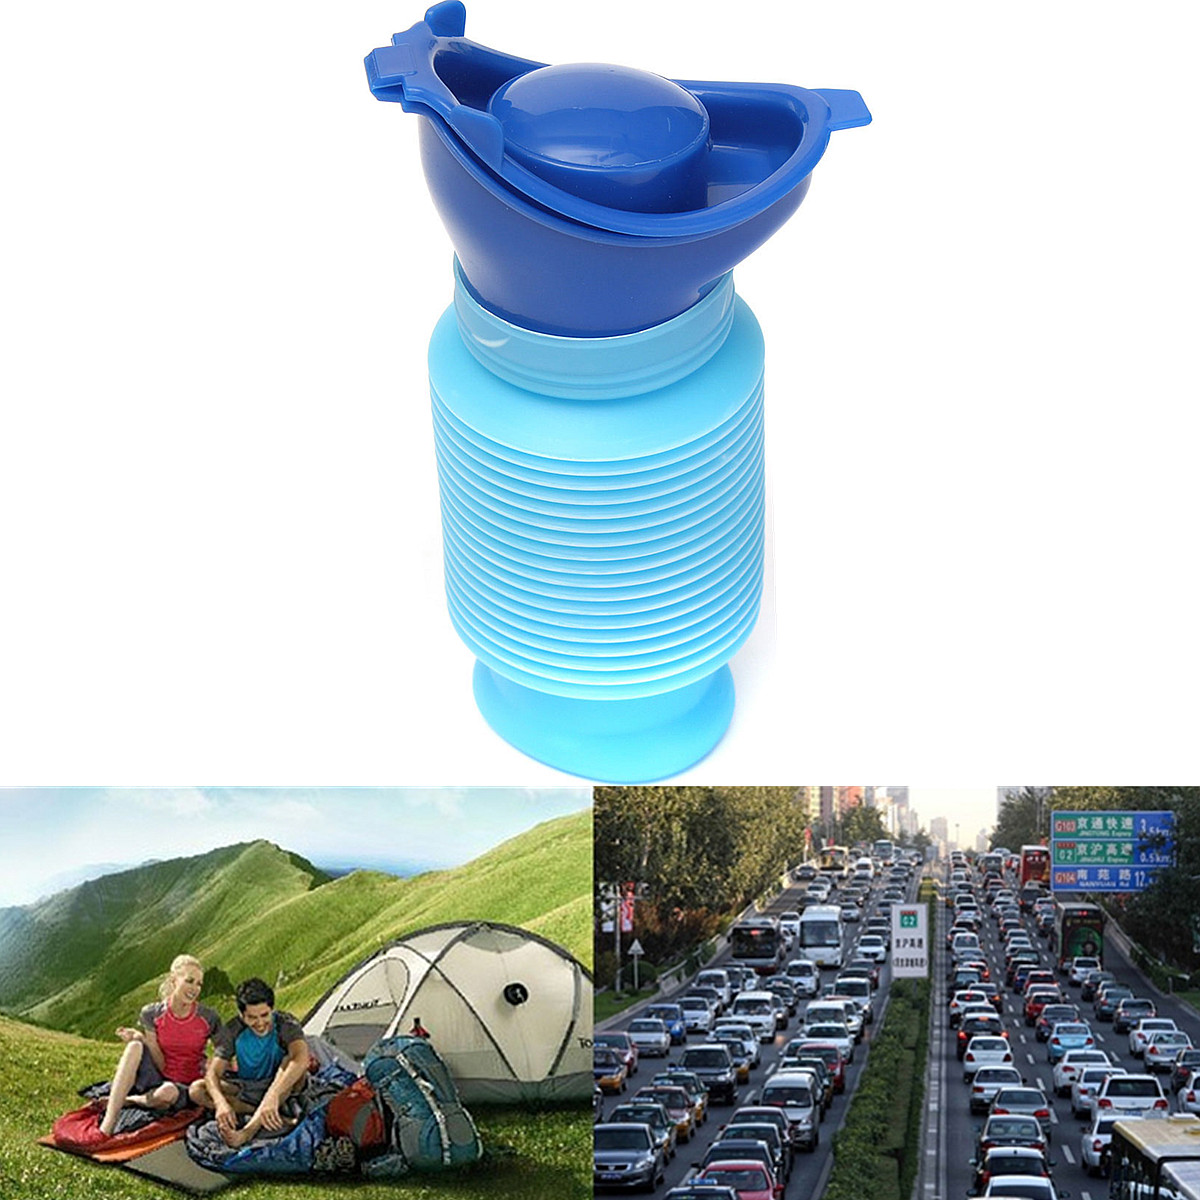 Unisex Portable Mobile Urinal Toilet Car Camping Outdoor ...